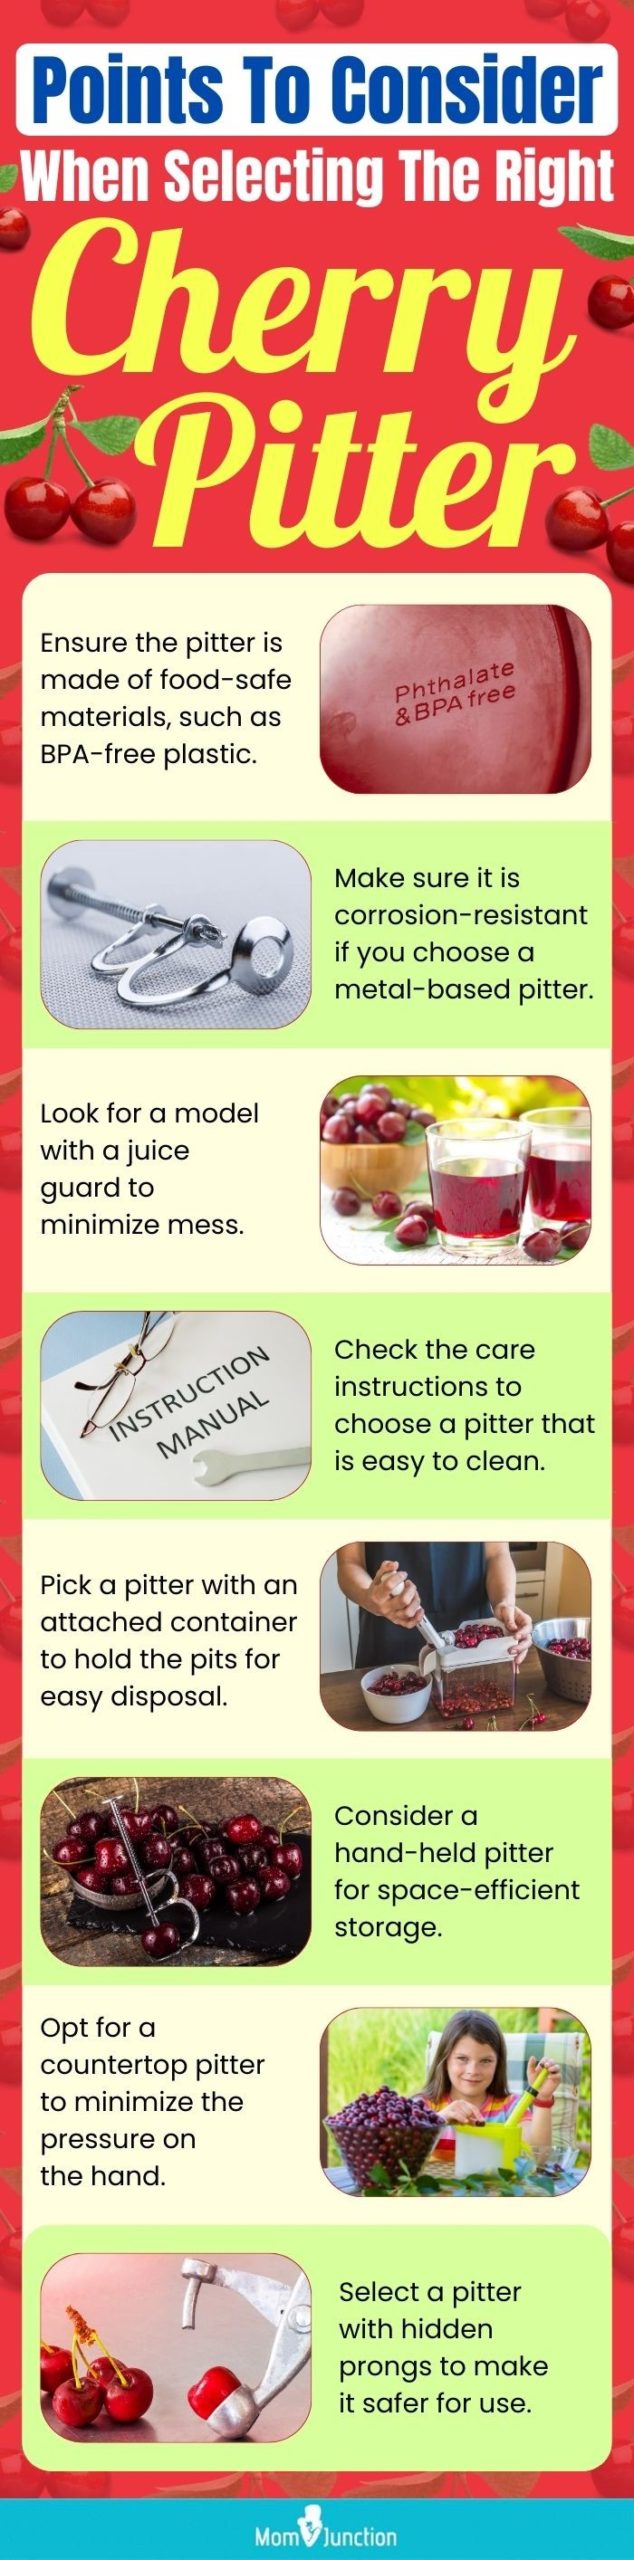 Points To Consider When Selecting The Right Cherry Pitter (infographic)